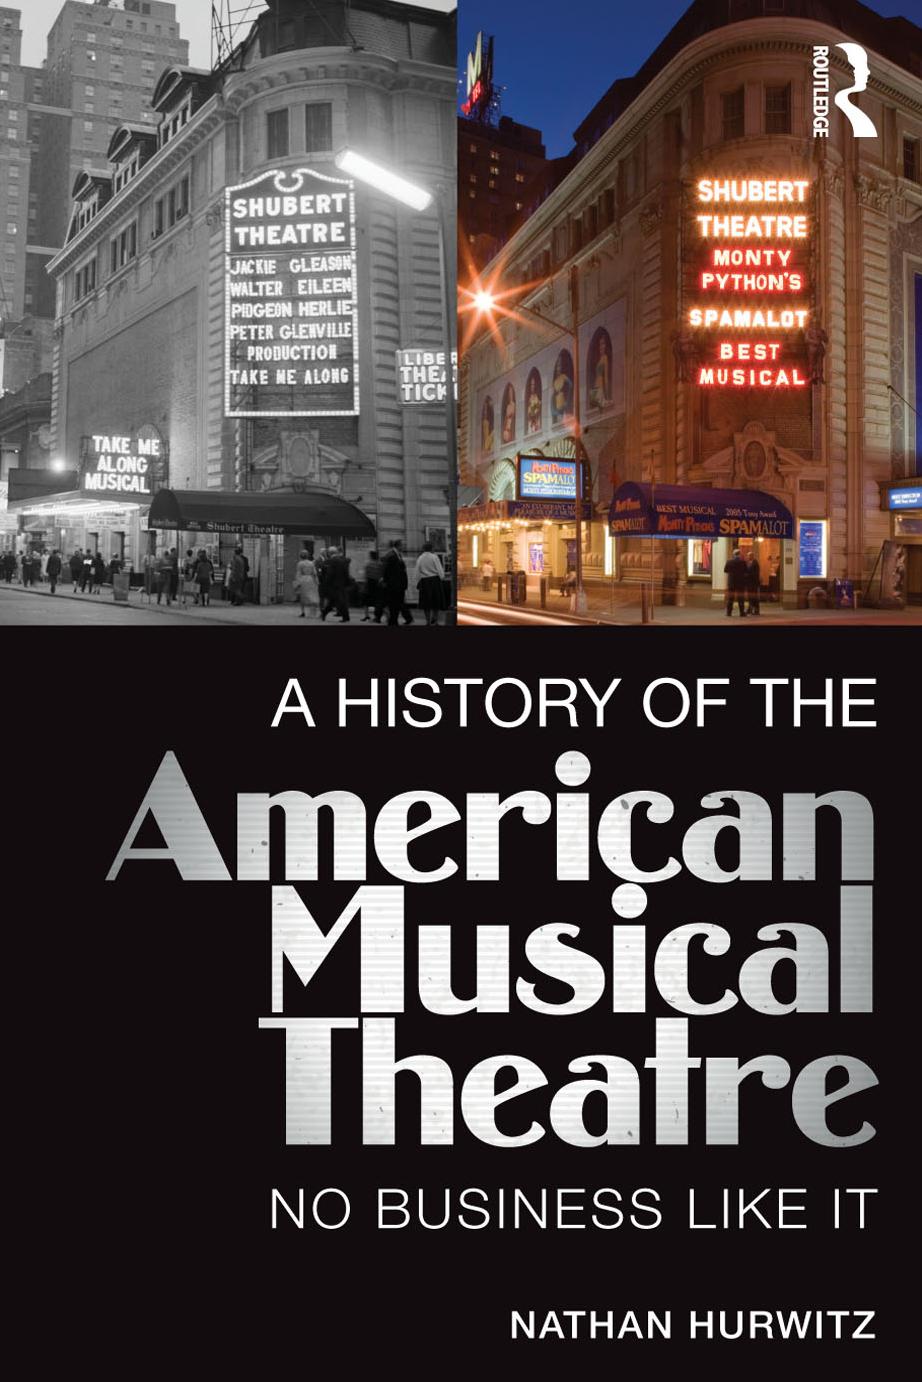 A History of the American Musical Theatre: No Business Like It by Nathan Hurwitz